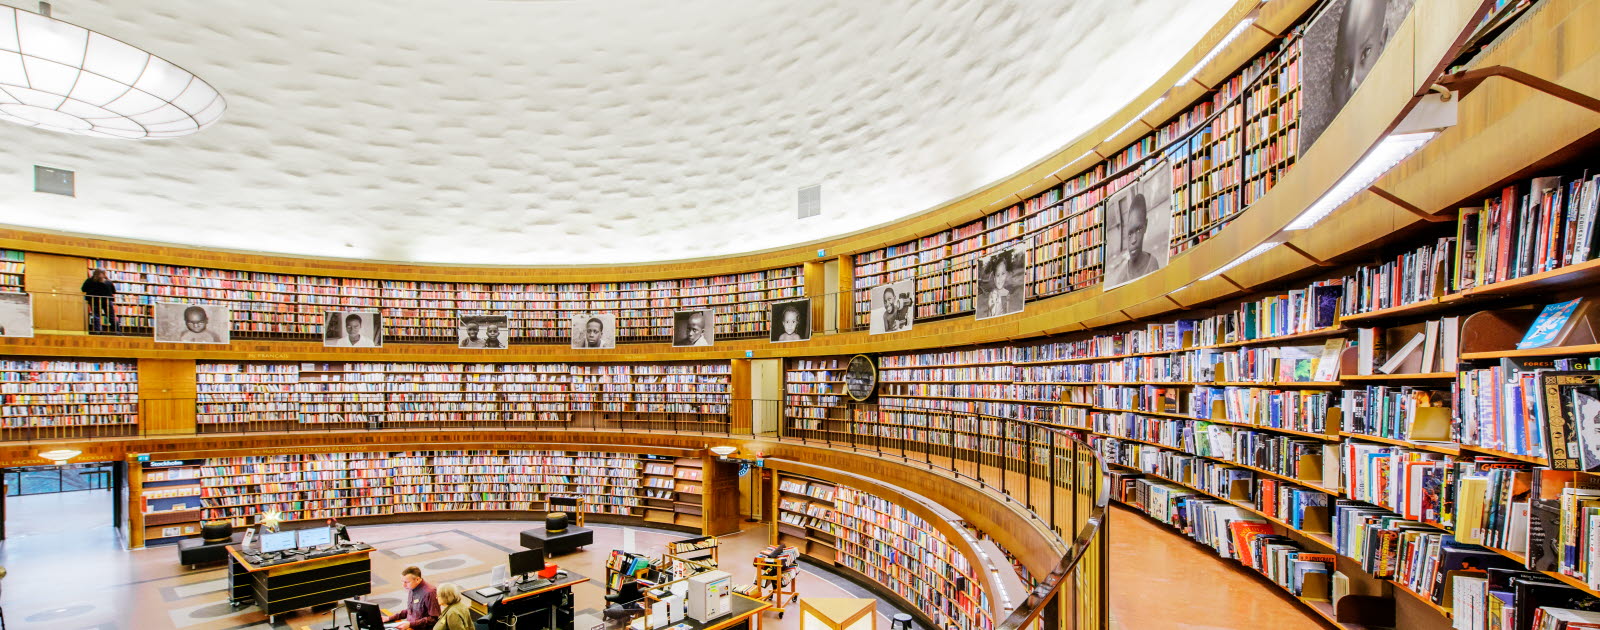 The Stockholm Public Library building in central Stockholm was designed by Swedish architect Gunnar Asplund.